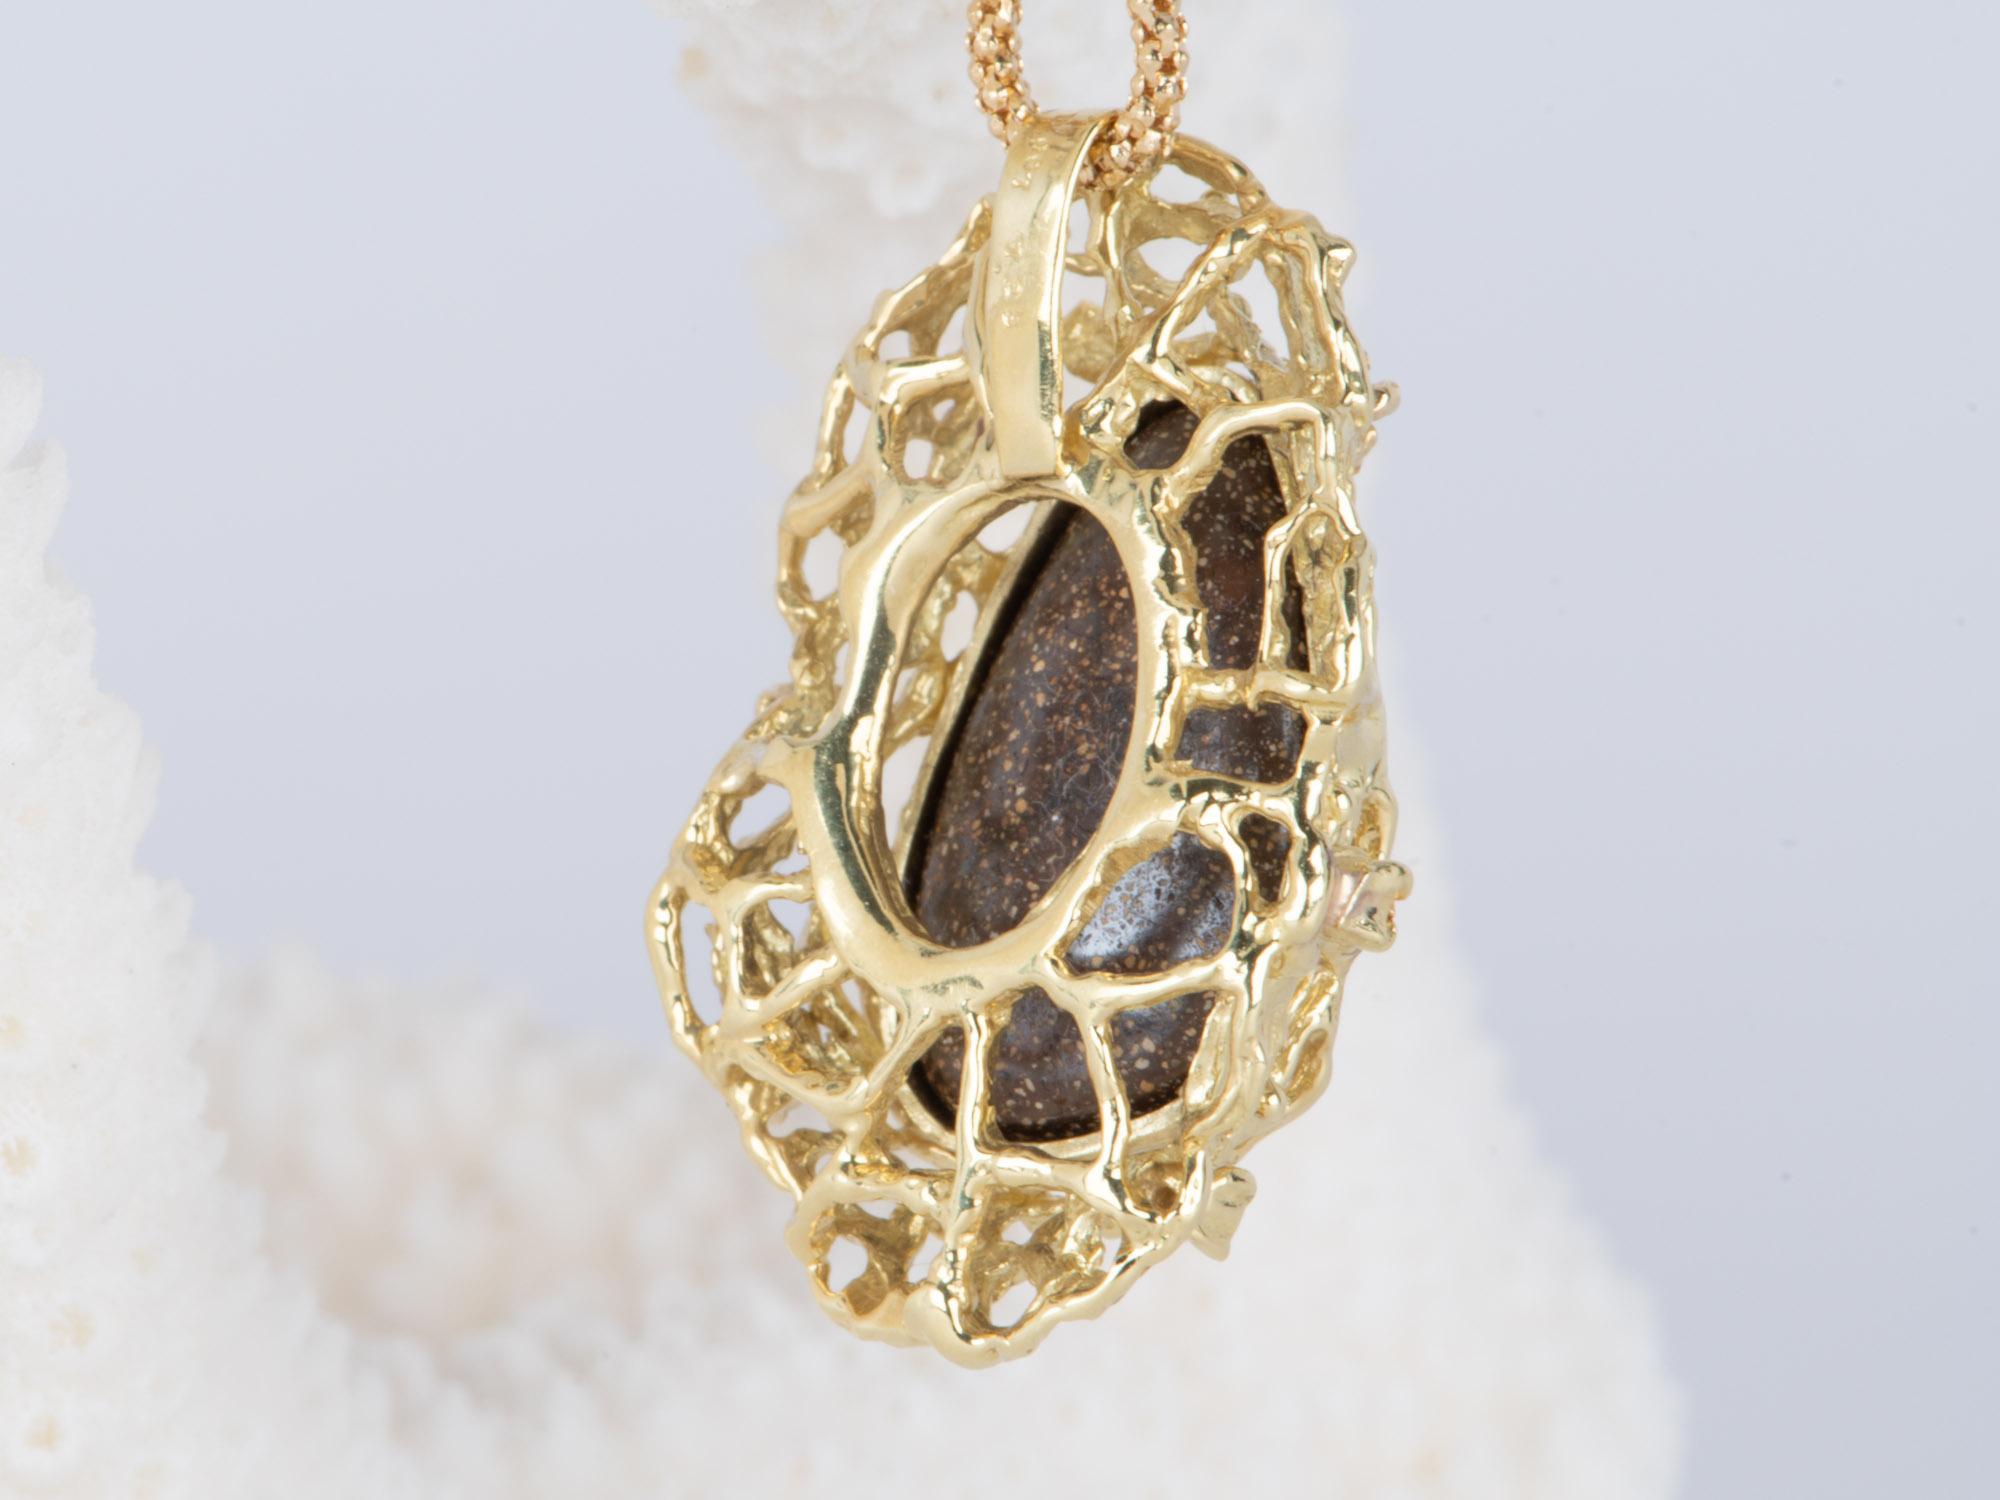 Australian Boulder Opal and Diamond Pendant with Chain 18K Gold 10.38g V1125 In New Condition For Sale In Osprey, FL